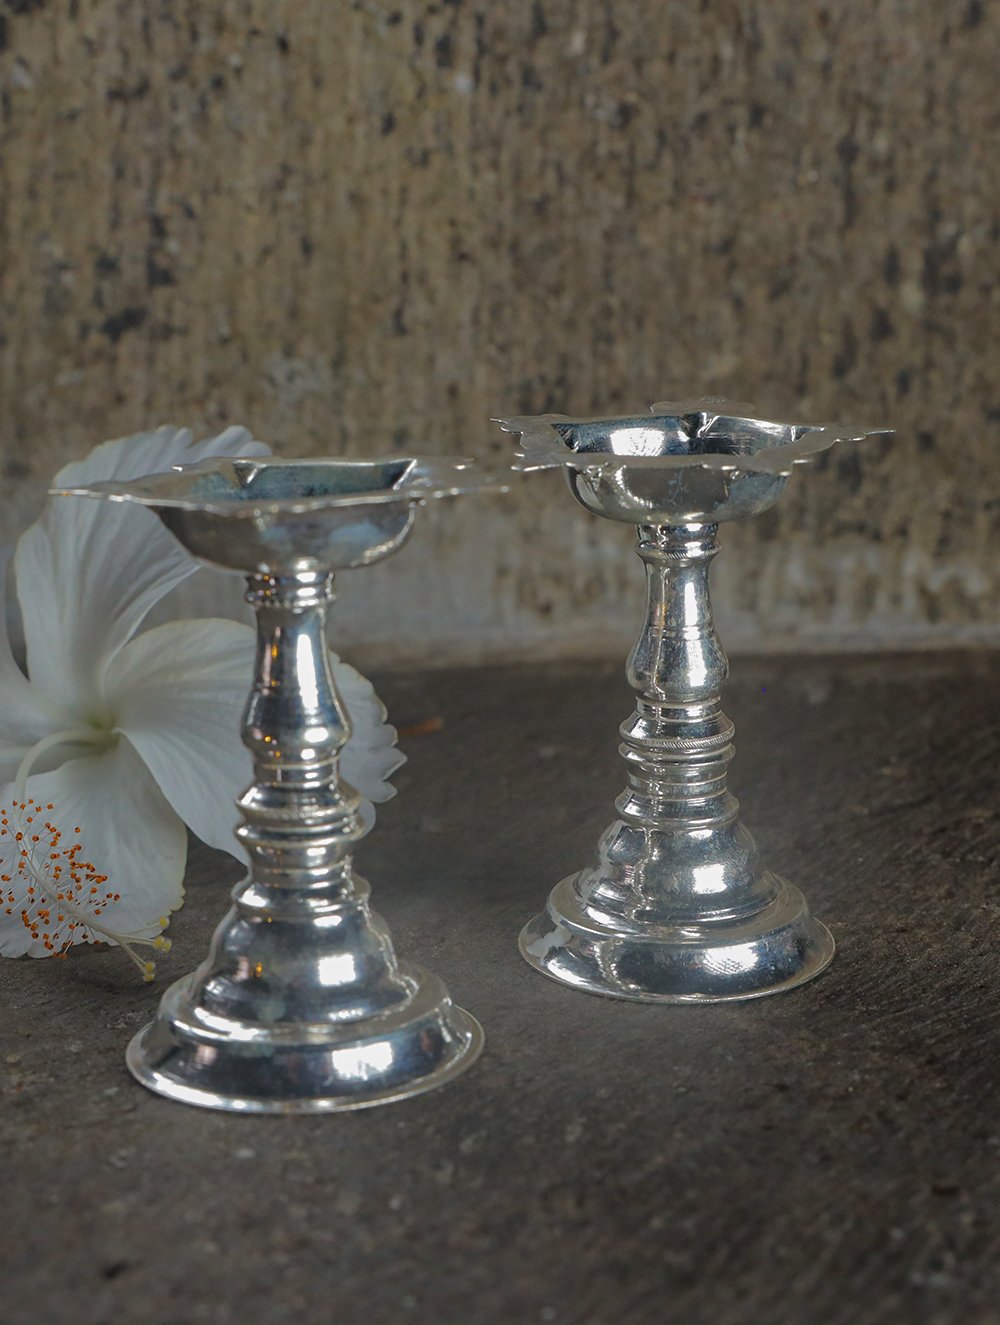 Load image into Gallery viewer, Traditional Pure Silver Diyas - Samay (Set of 2), Height - 2.5”